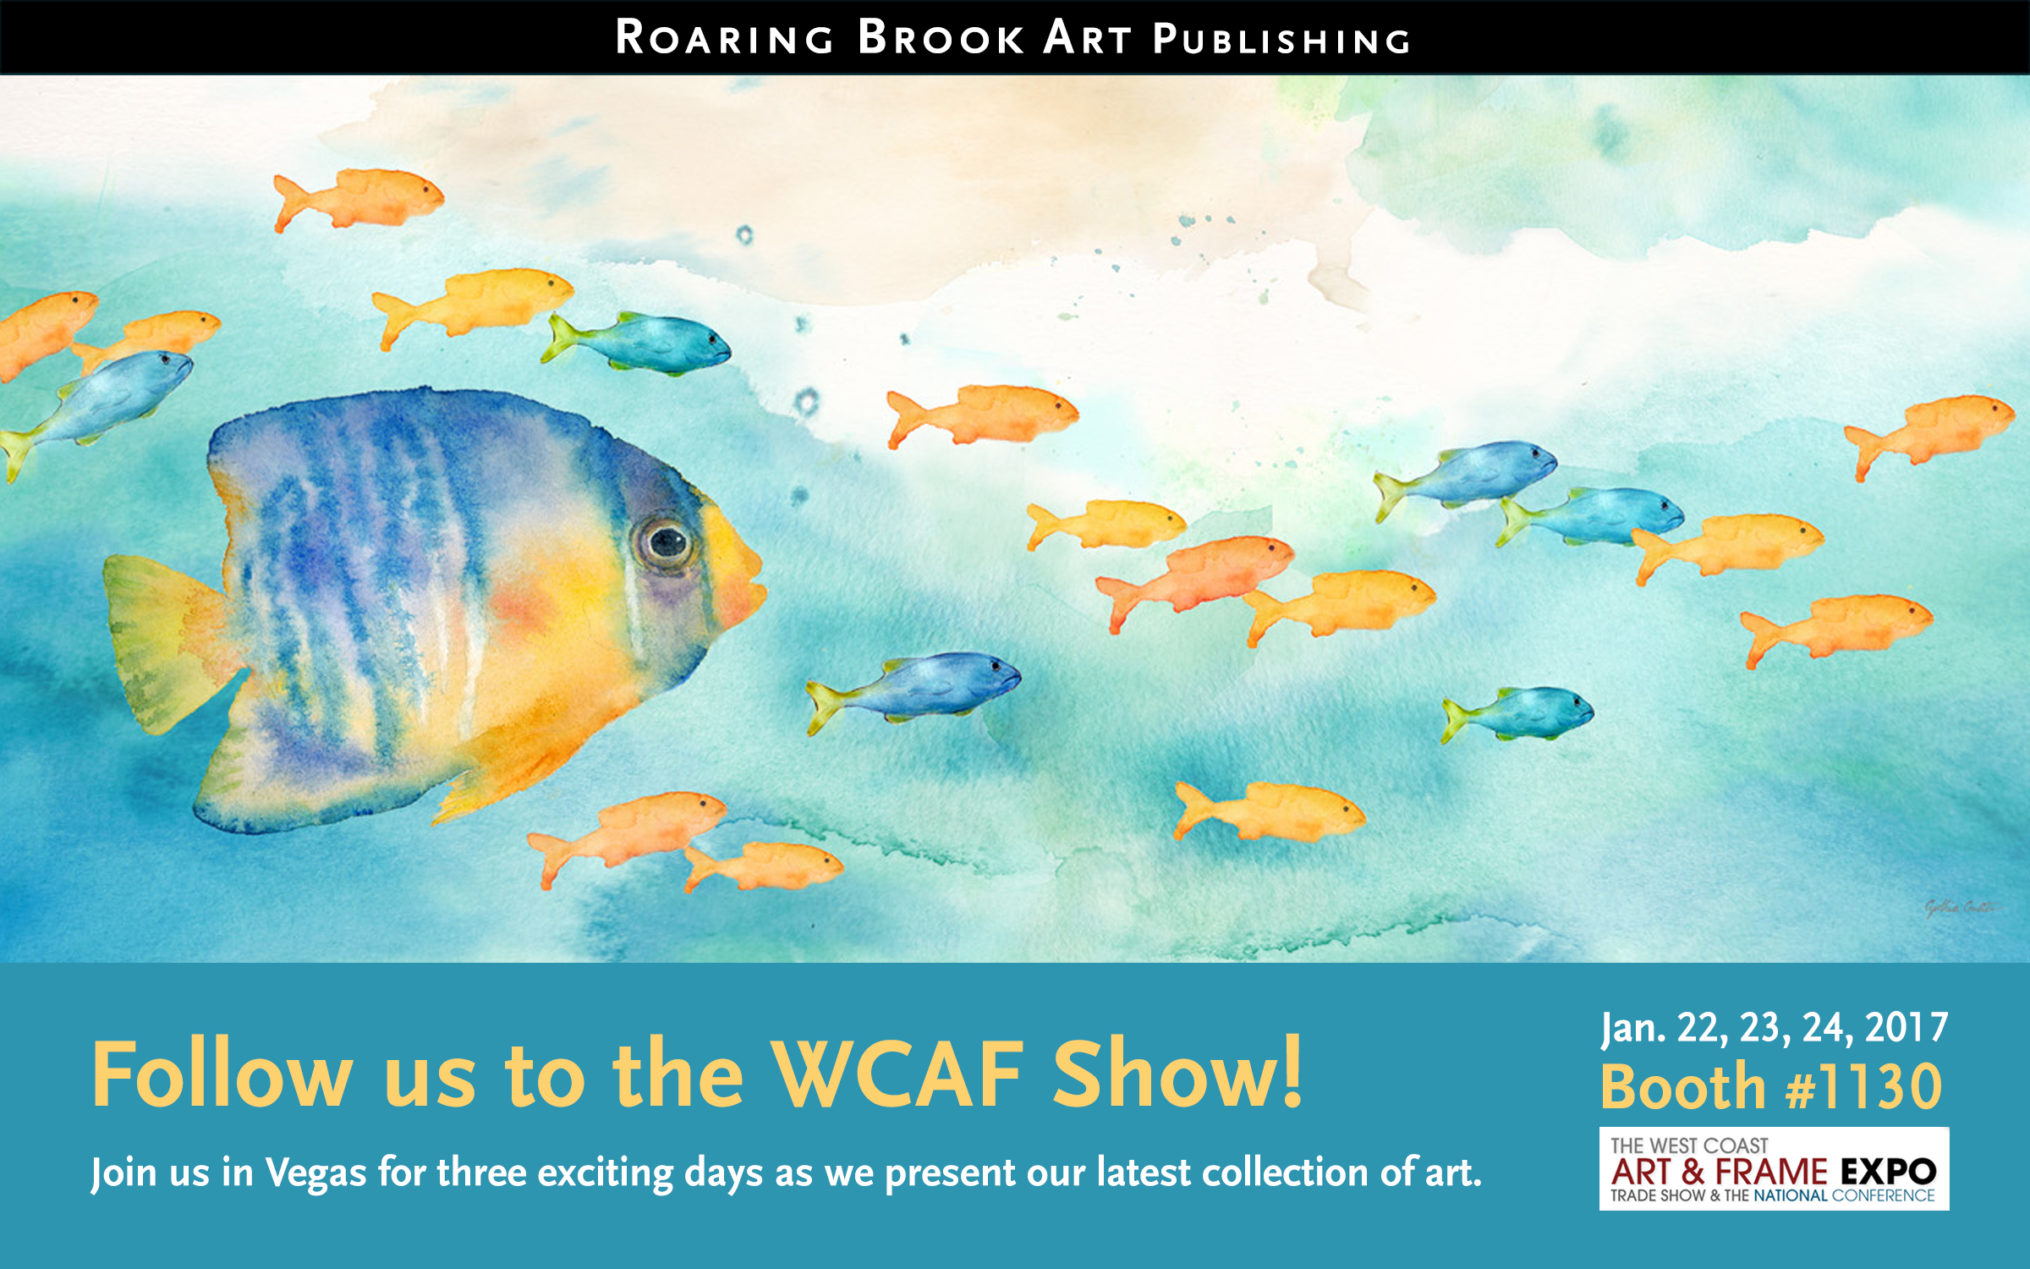 Follow us to the WCAF Show! Roaring Brook Art Licensed Art & Design